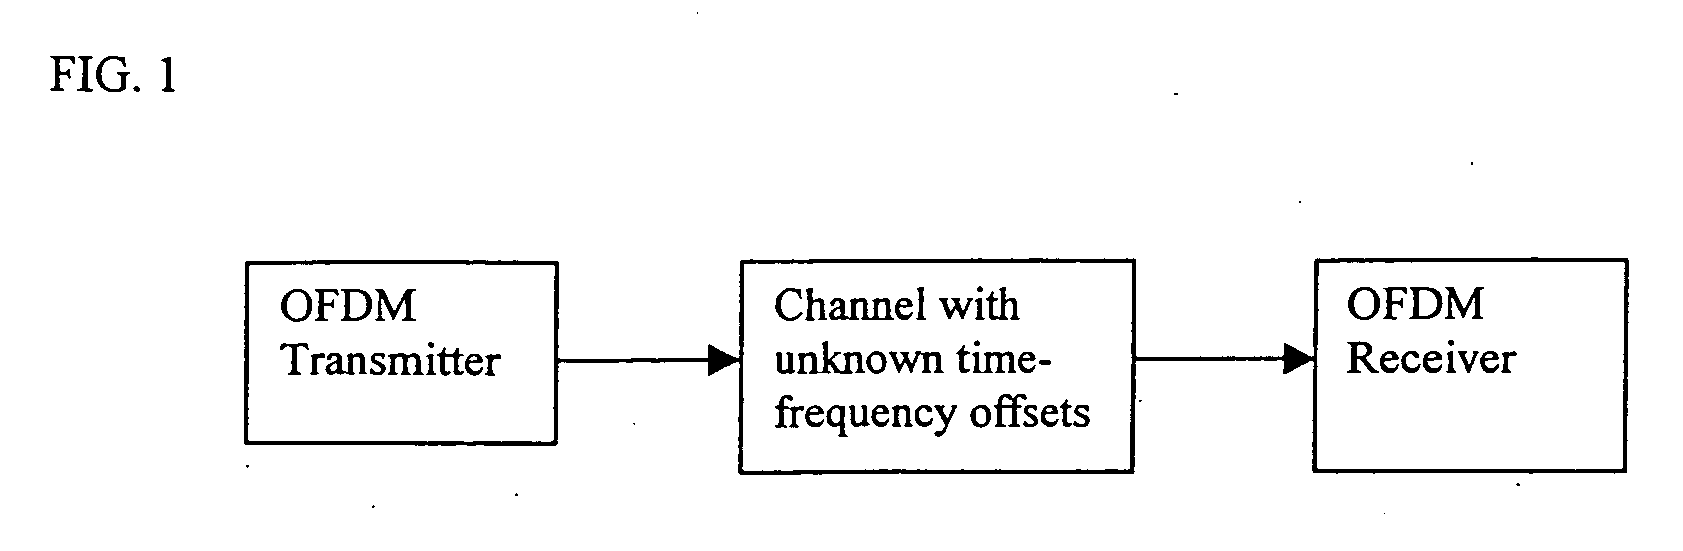 Method and apparatus for time and frequency synchronization of OFDM communication systems